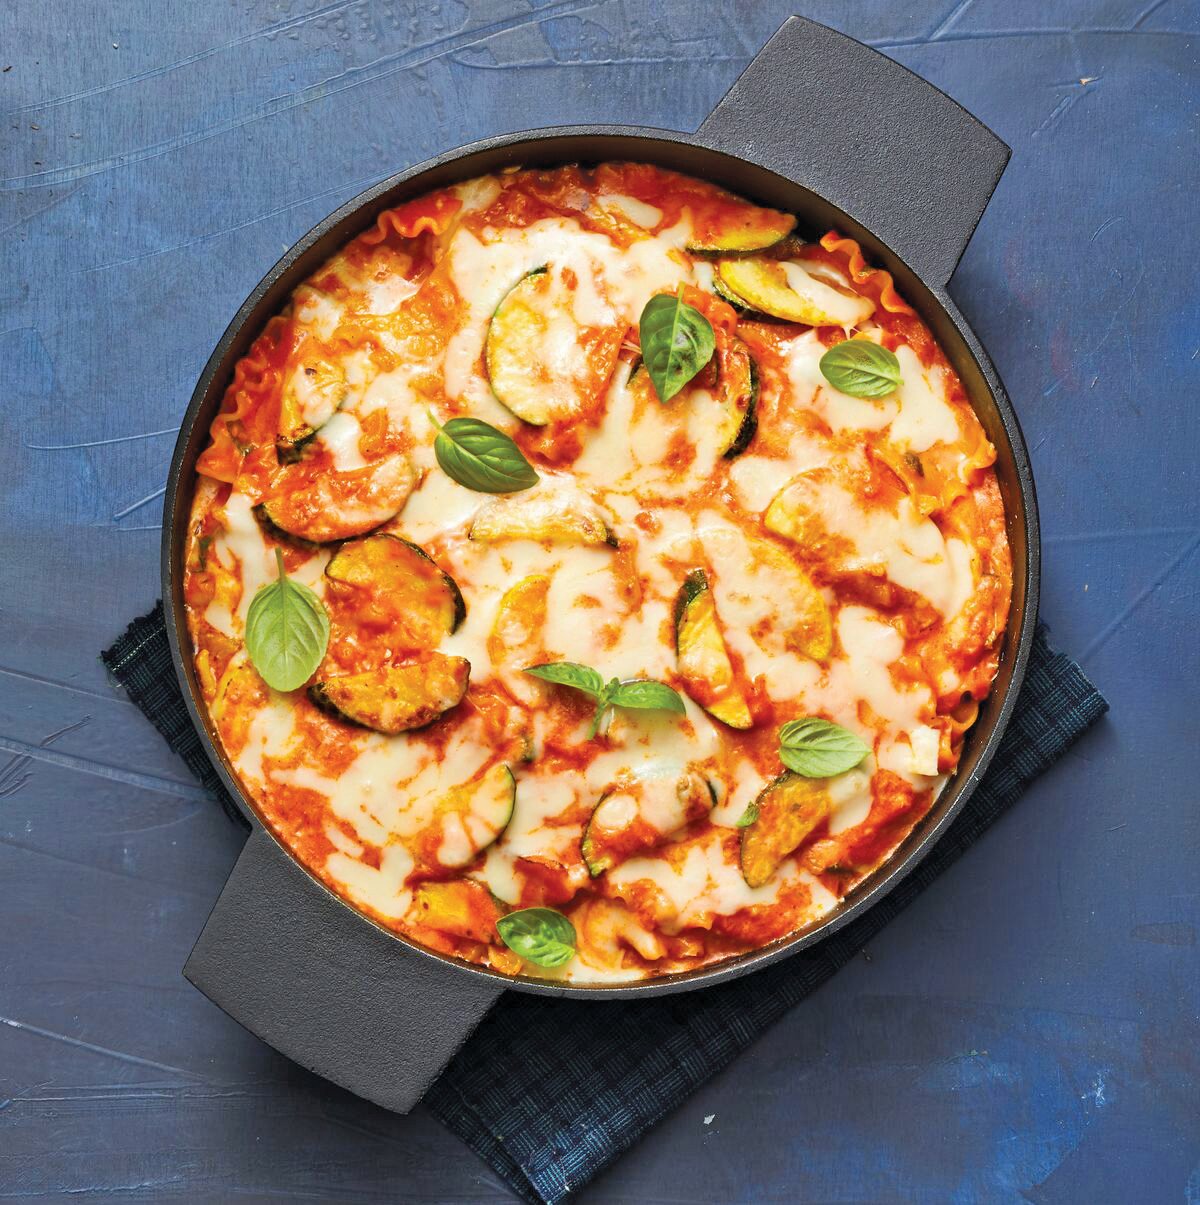 Zucchini is the main ingredient in this recipe for skillet lasagna that helps you consume the summer’s bounty.